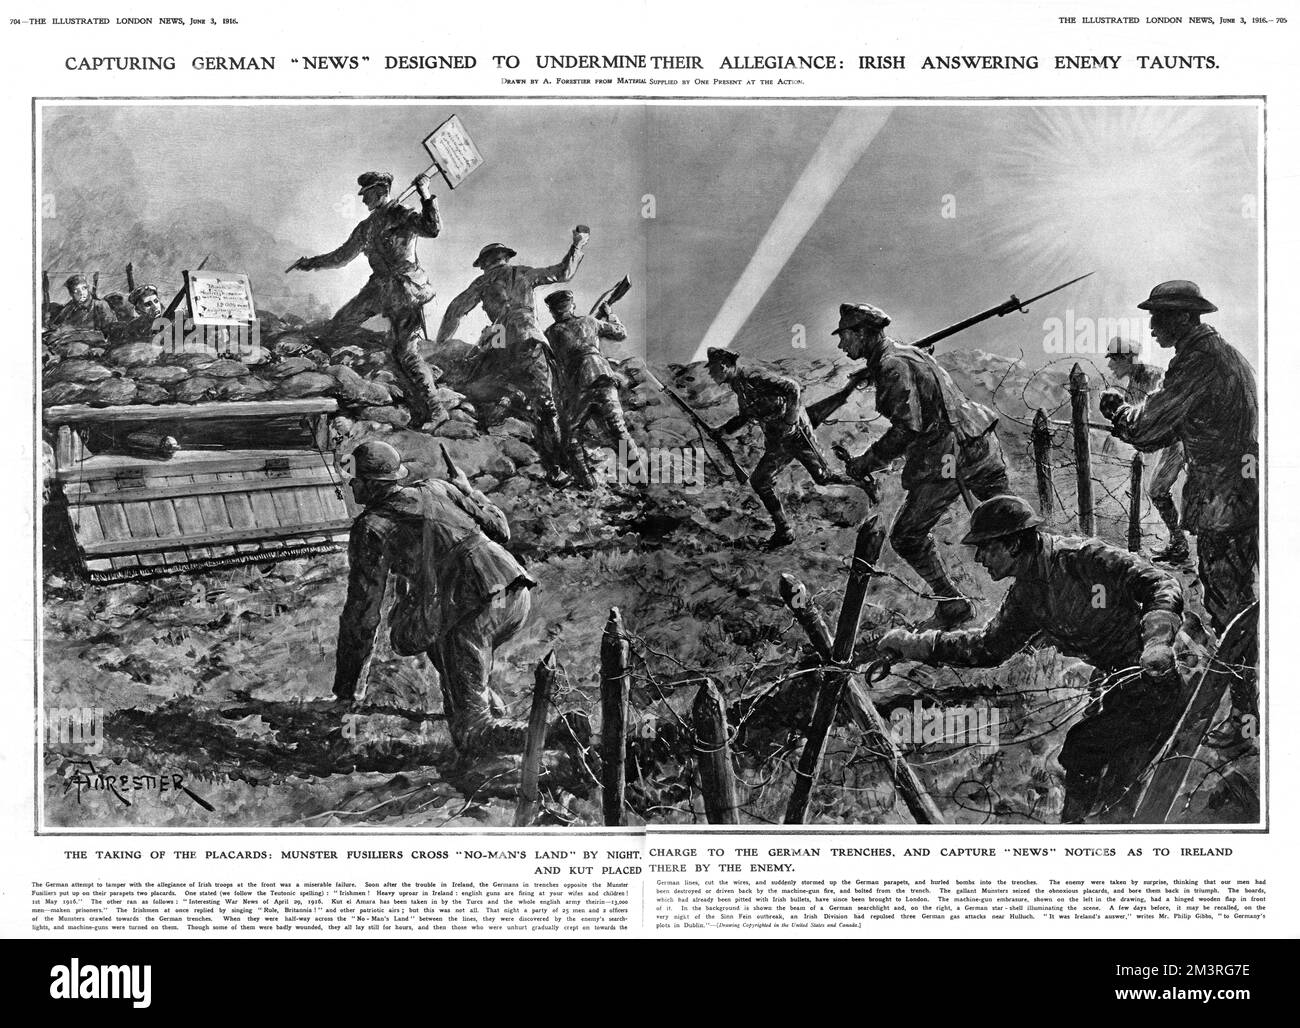 Capturing German news designed to undermine their allegiance: Irish answering enemy taunts in 1916. The taking of the placards: Munster fusiliers cross no-man's land by night, charge to the German trenches, and capture news notices as to Ireland and Kut el Amara placed there by the enemy.  1916 Stock Photo